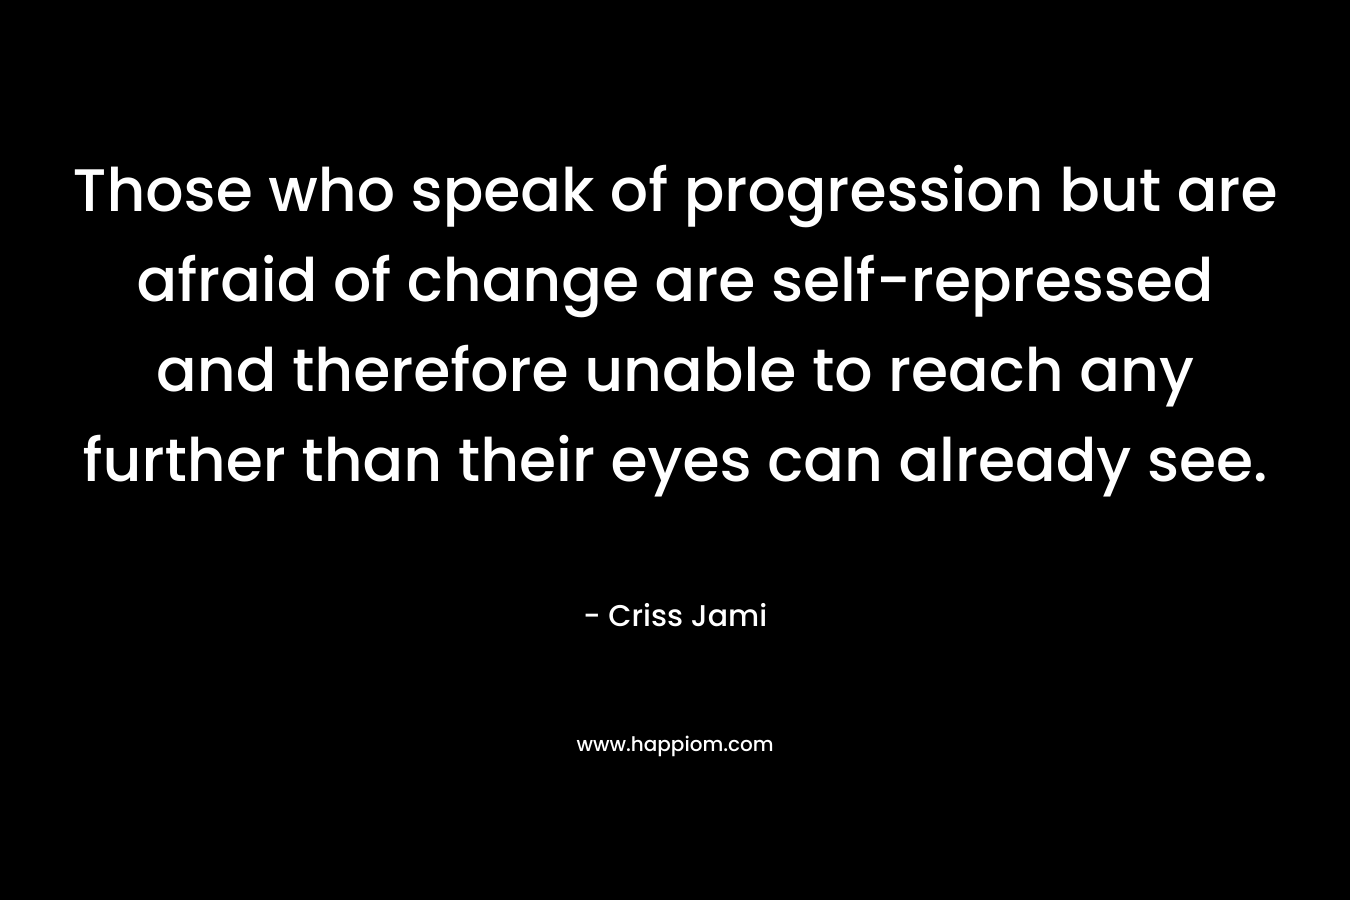 Those who speak of progression but are afraid of change are self-repressed and therefore unable to reach any further than their eyes can already see.